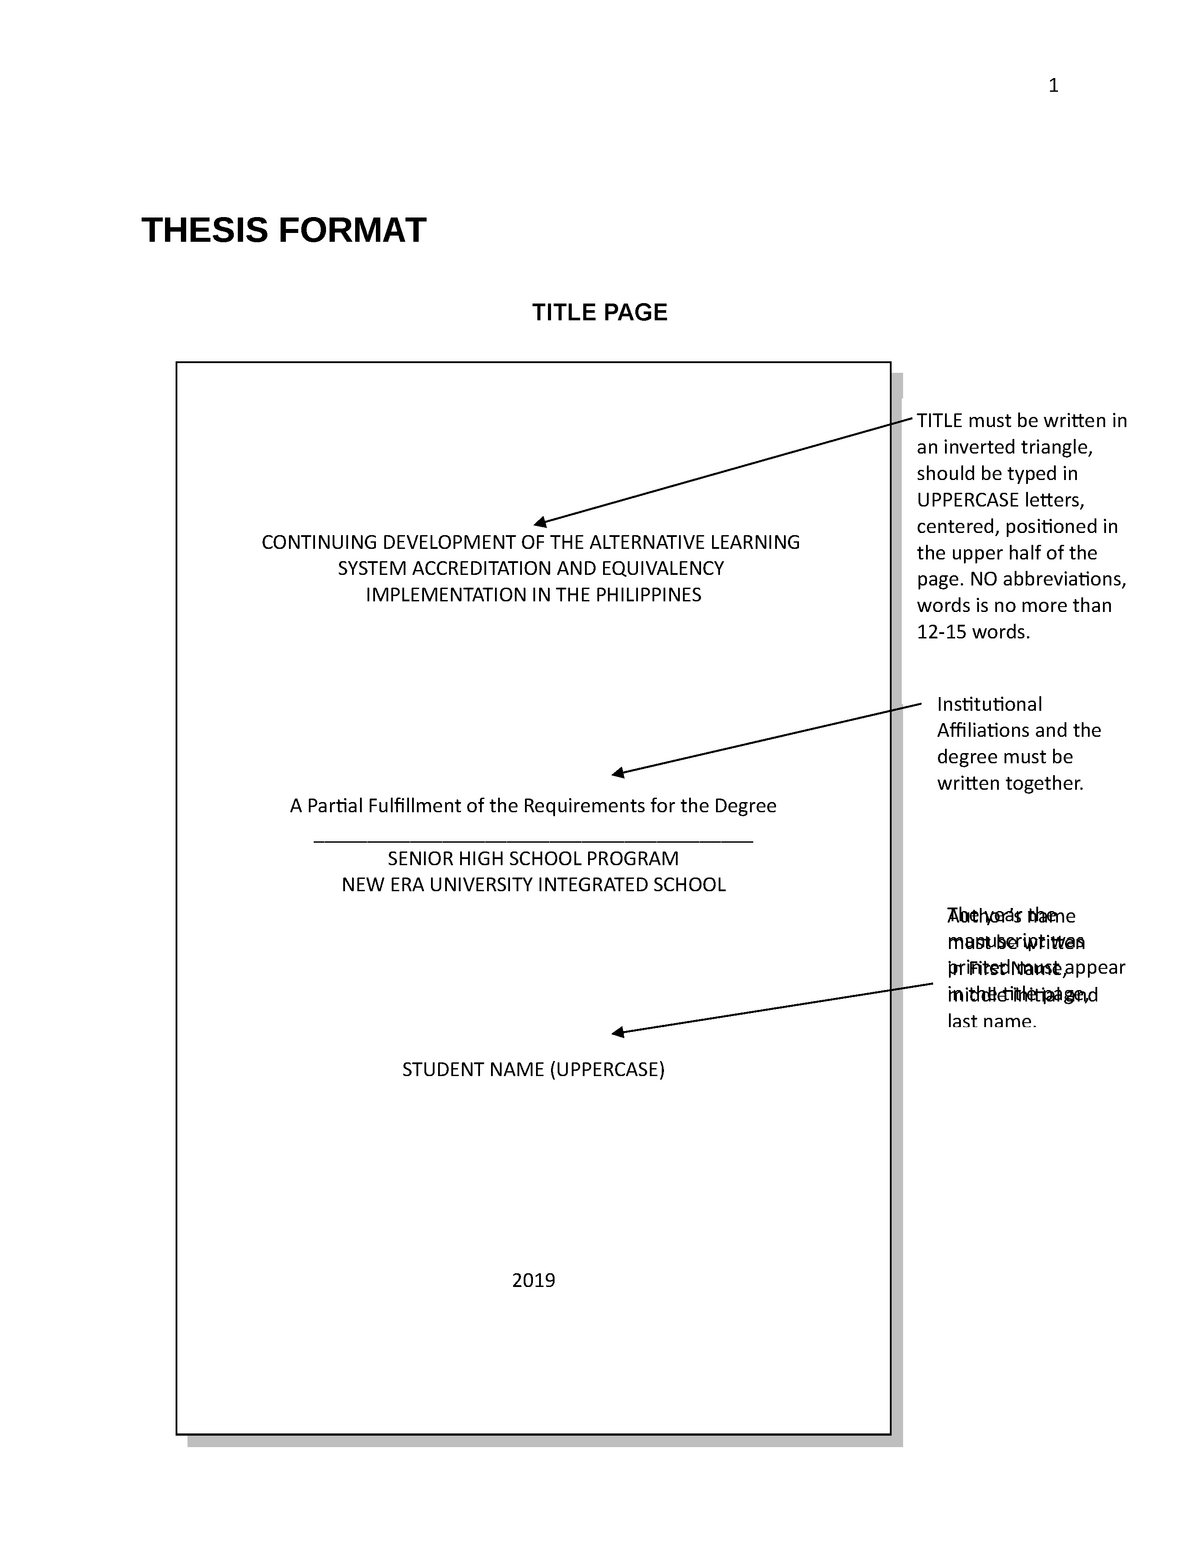 open thesis format